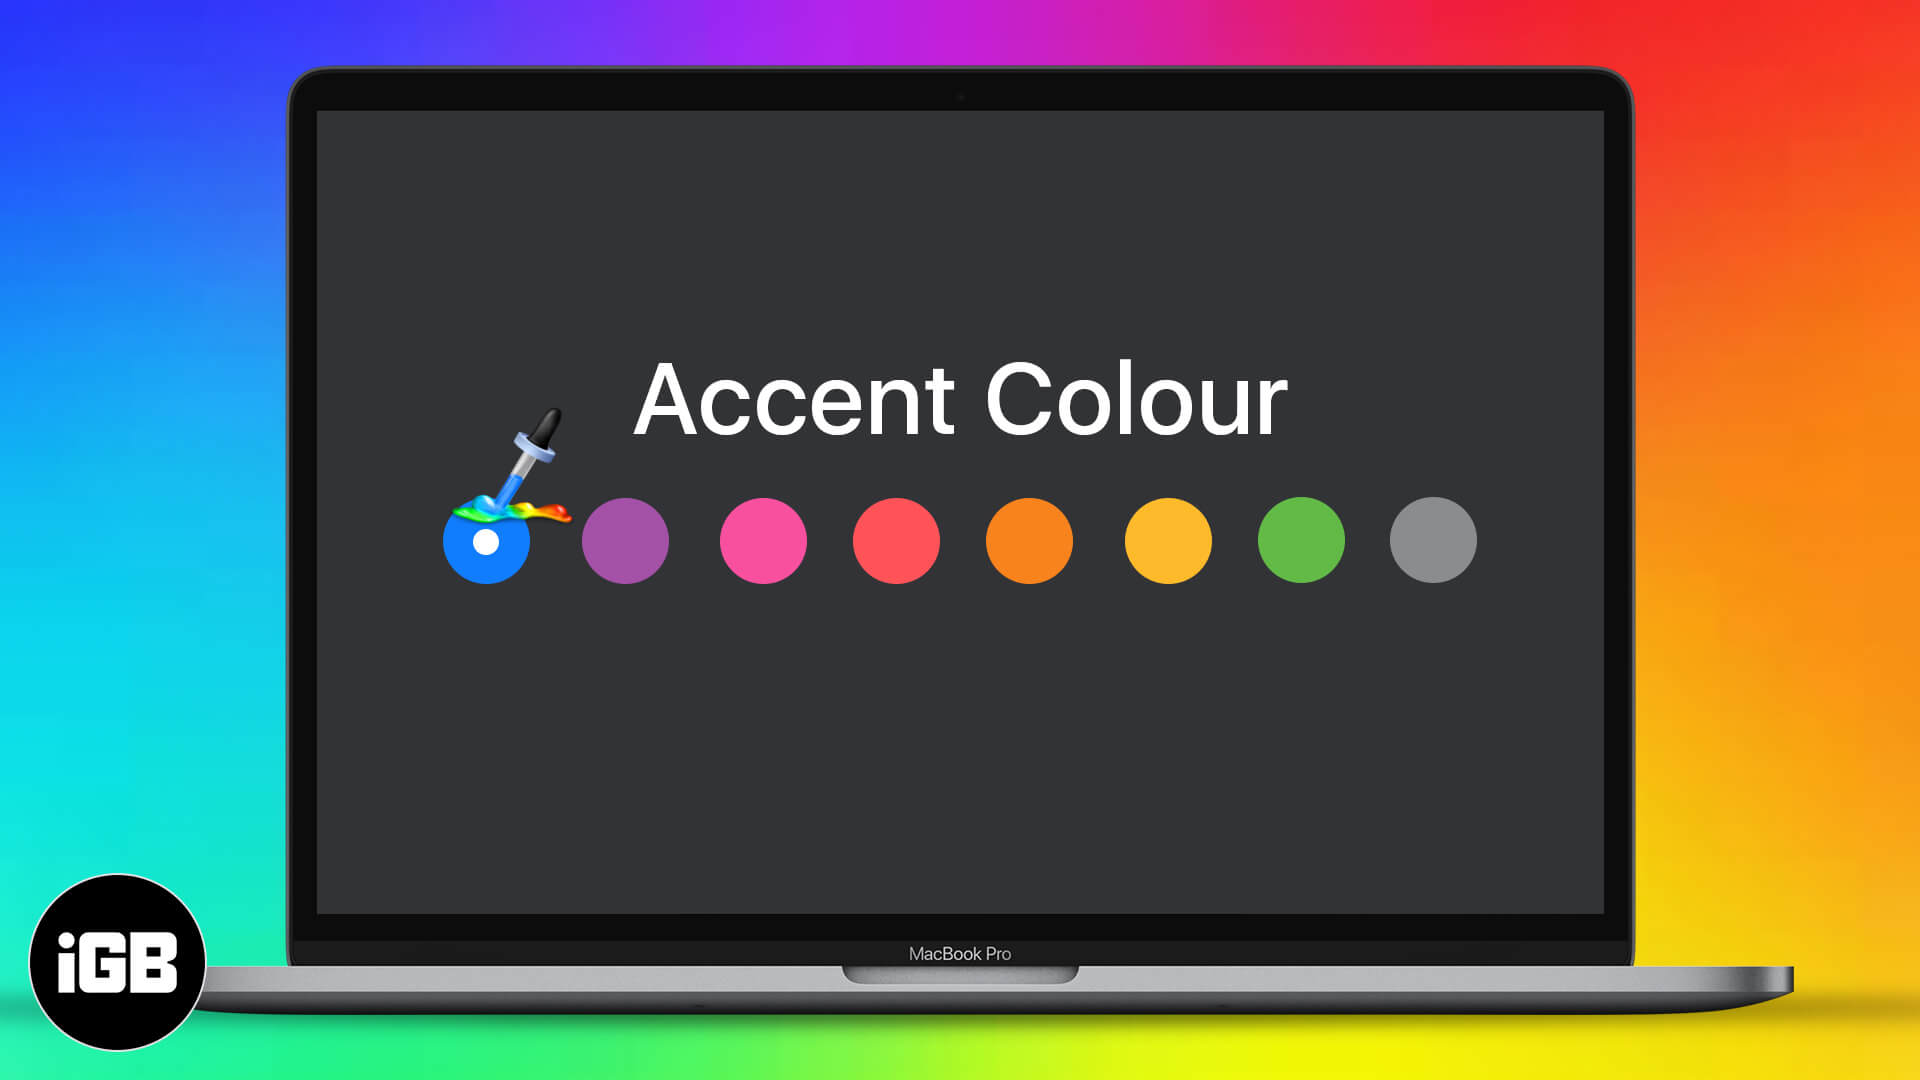 How to Change the System Accent Color on Mac